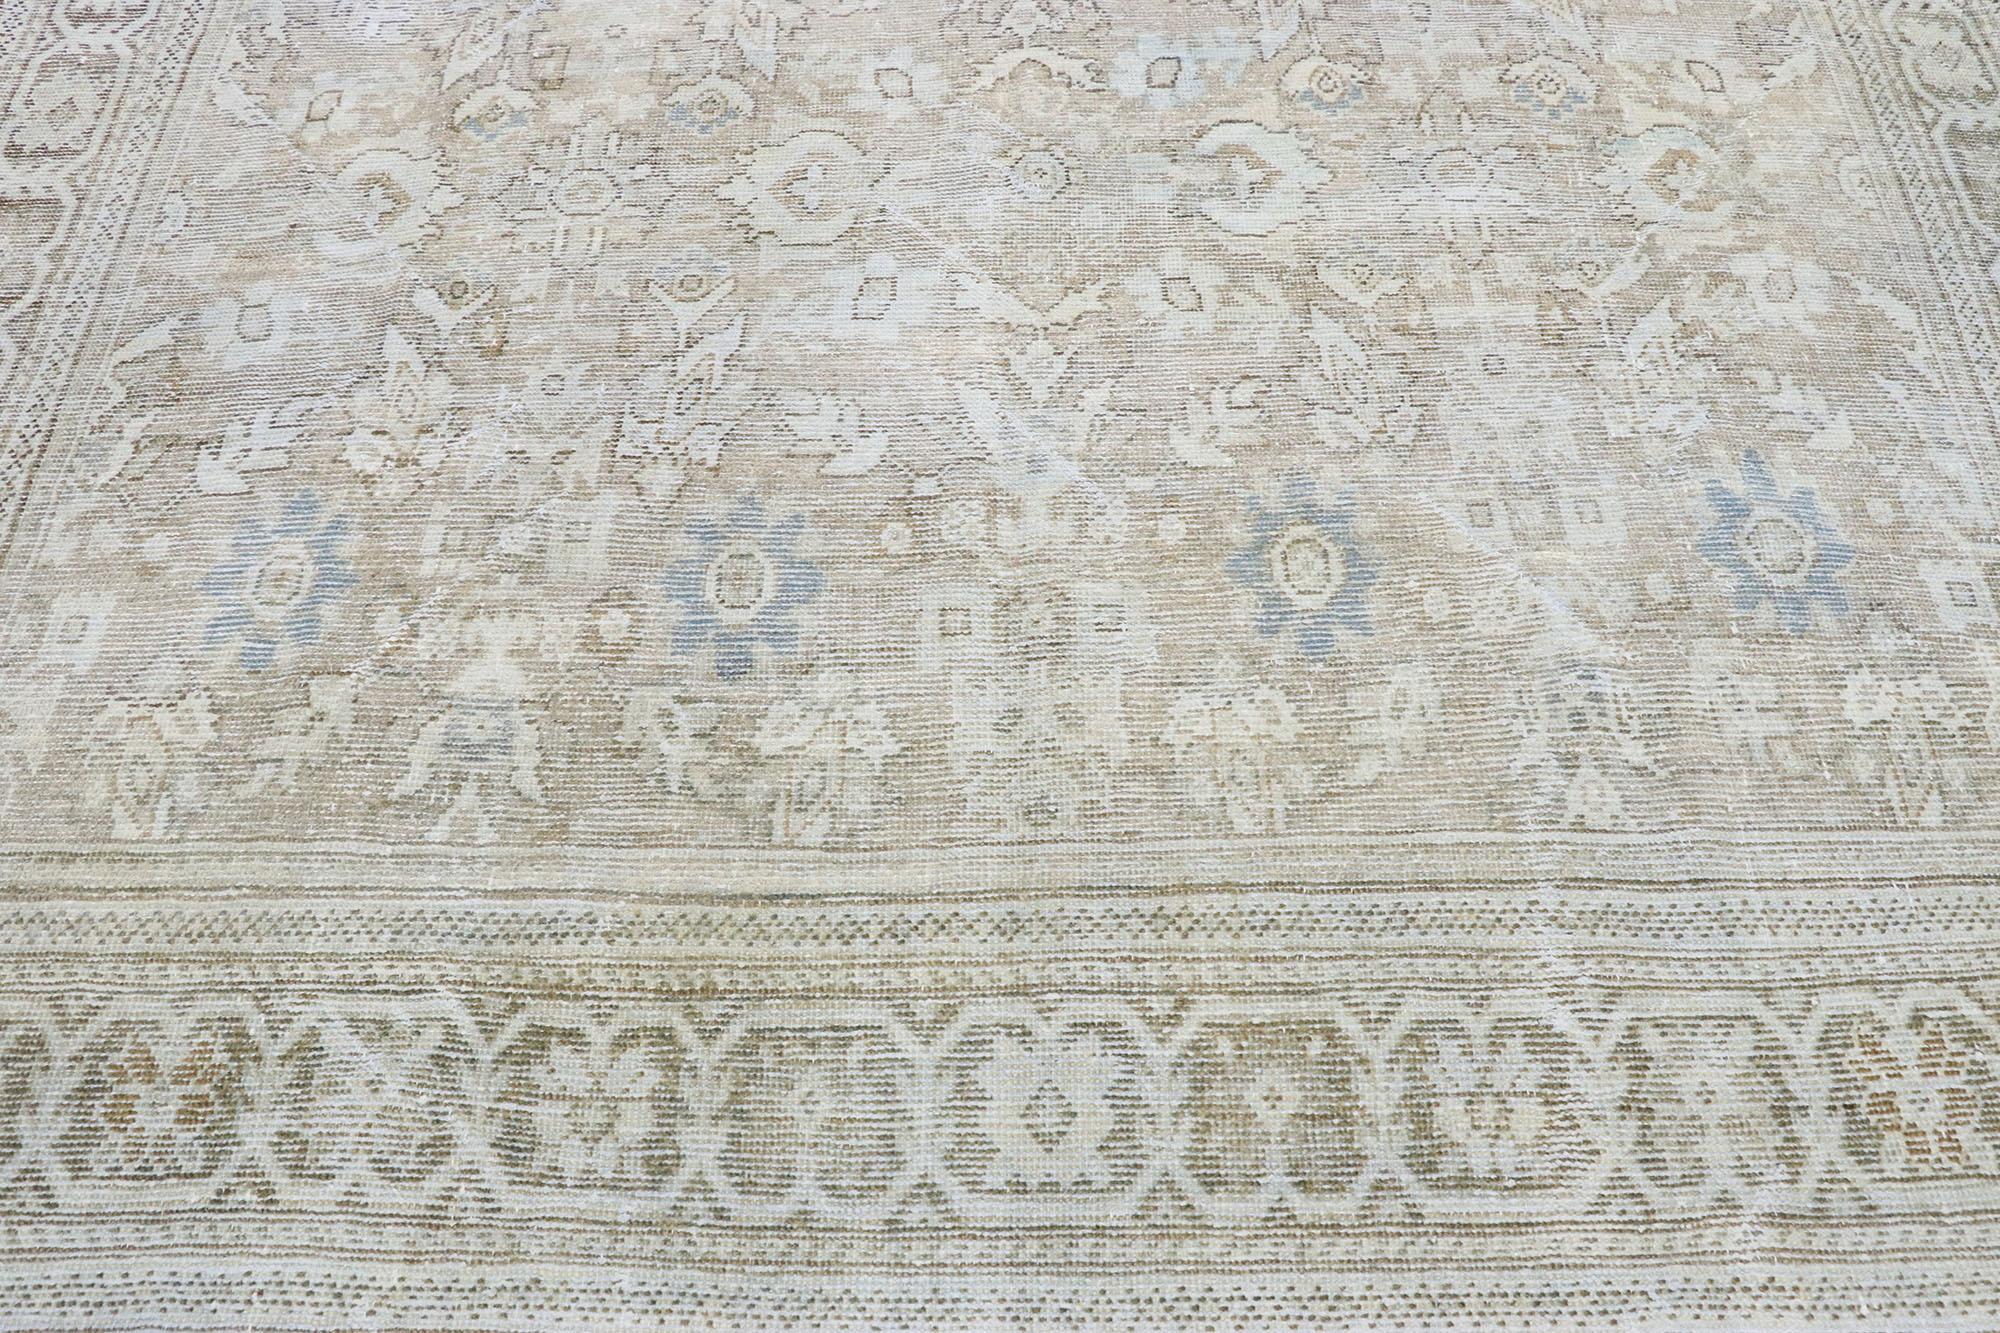 Hand-Knotted Distressed Vintage Persian Mahal Rug with Rustic Hamptons Cottage Style For Sale